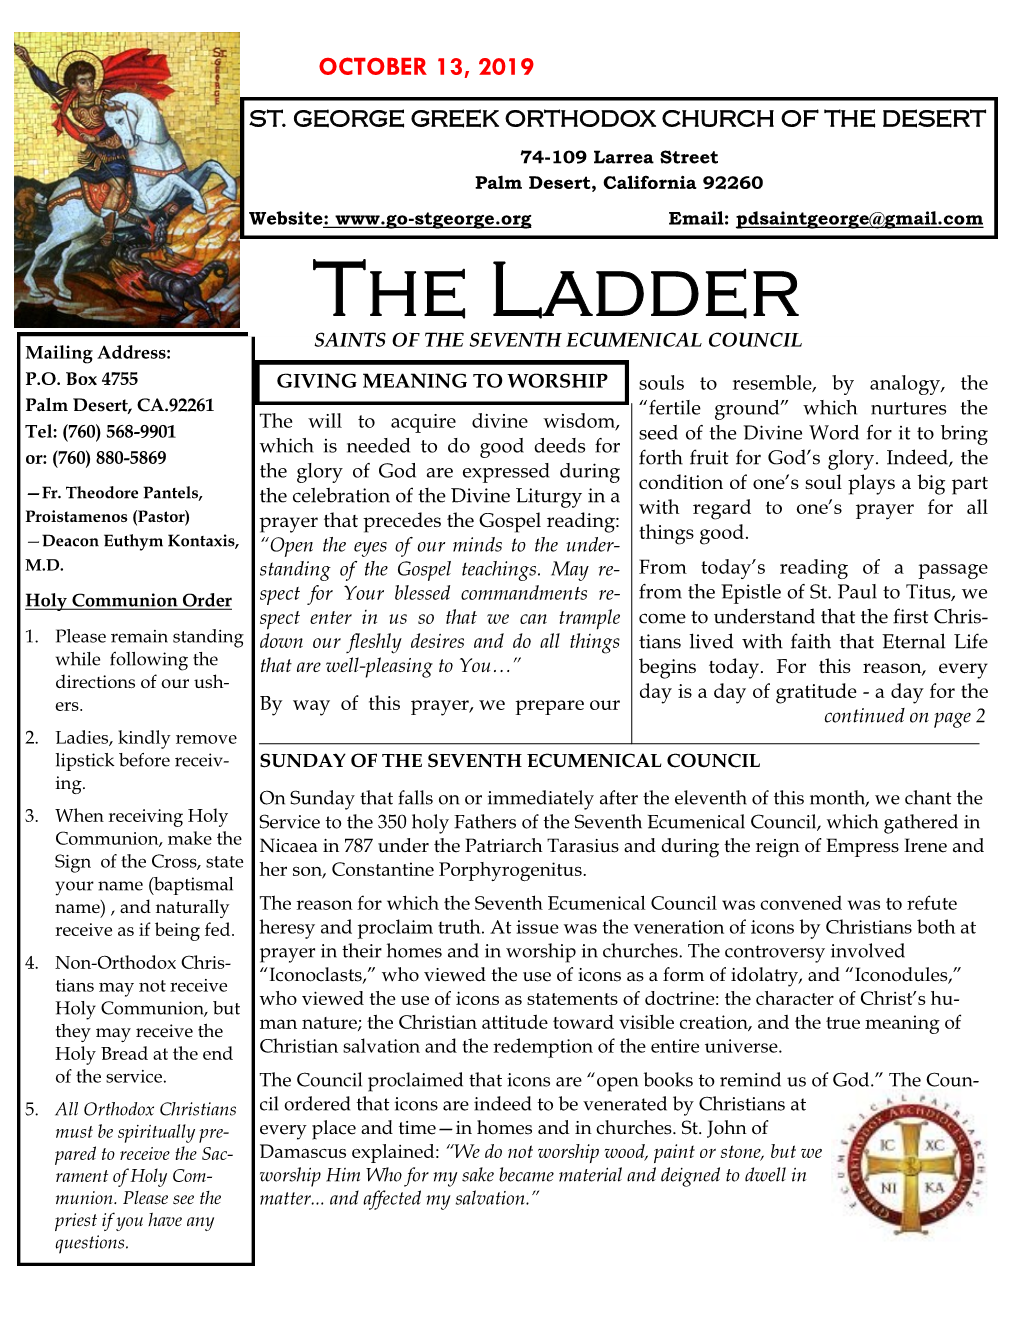 The Ladder SAINTS of the SEVENTH ECUMENICAL COUNCIL Mailing Address: P.O